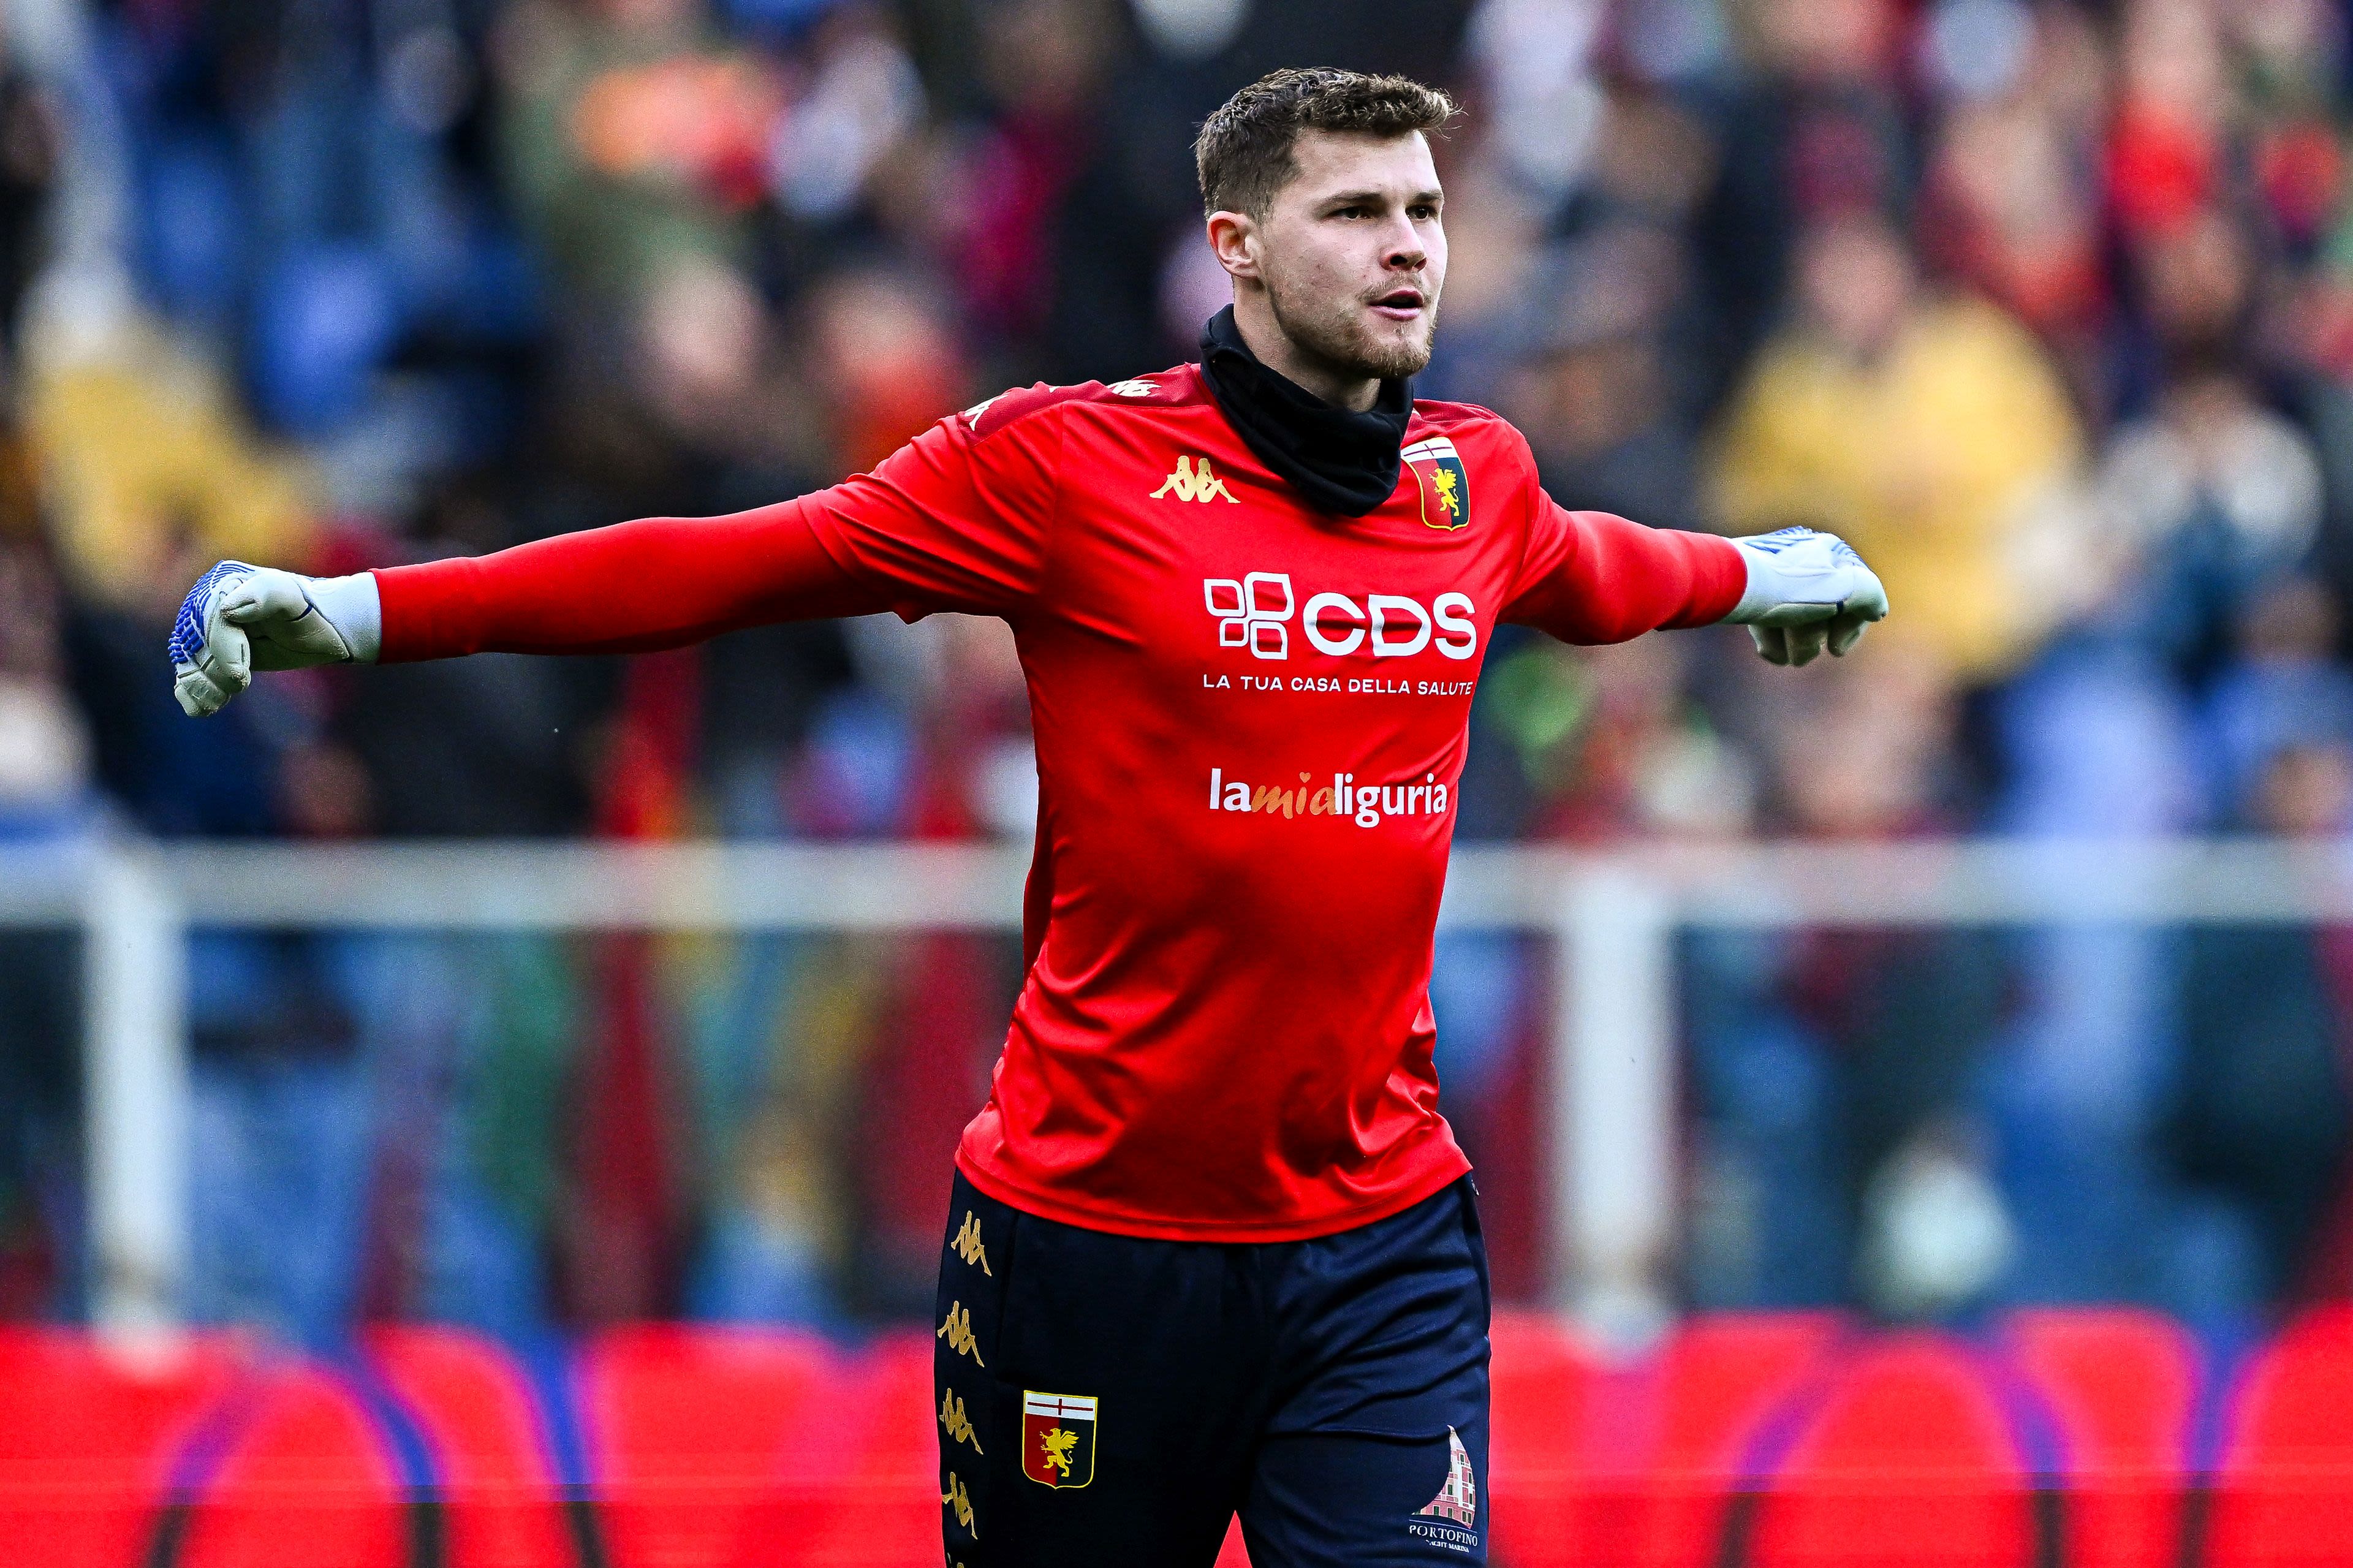 Genoa Coach Heaps Praise On Inter Milan Summer Signing: “Goalkeepers Like Him Are Hard To Find”